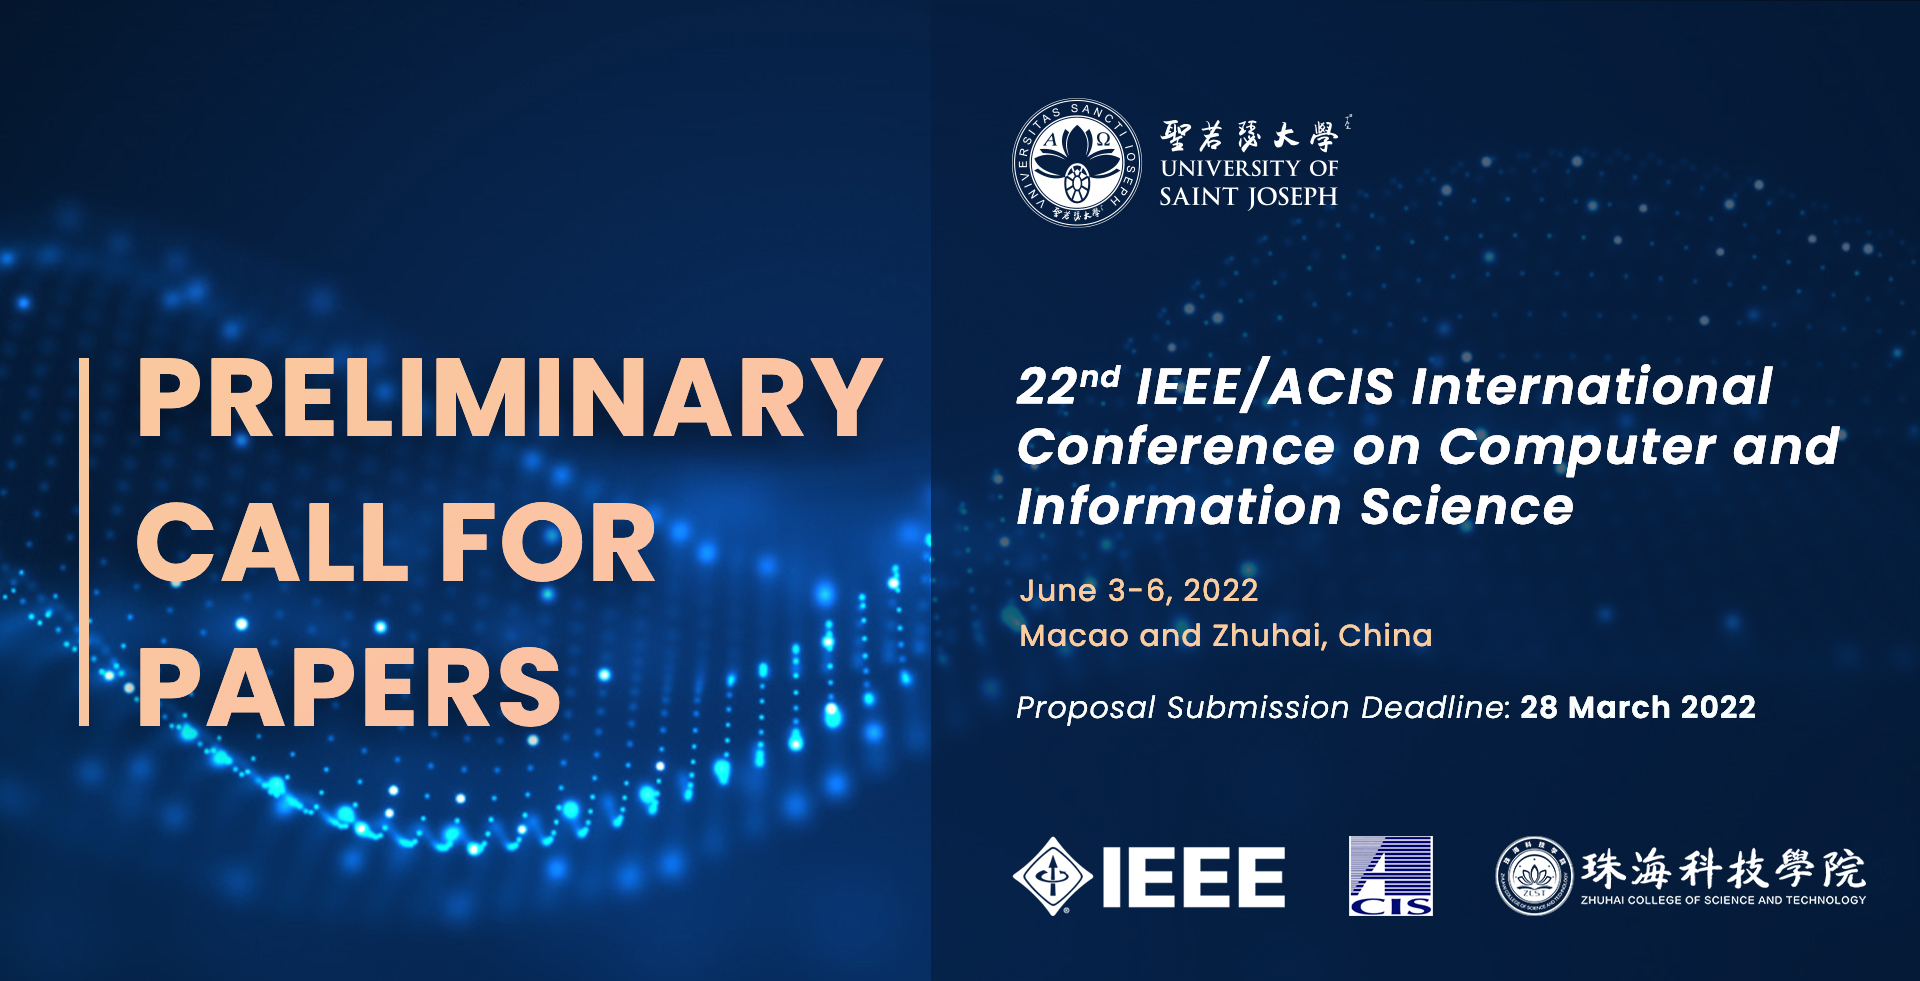 Preliminary Call for Papers 22nd IEEE/ACIS International Conference